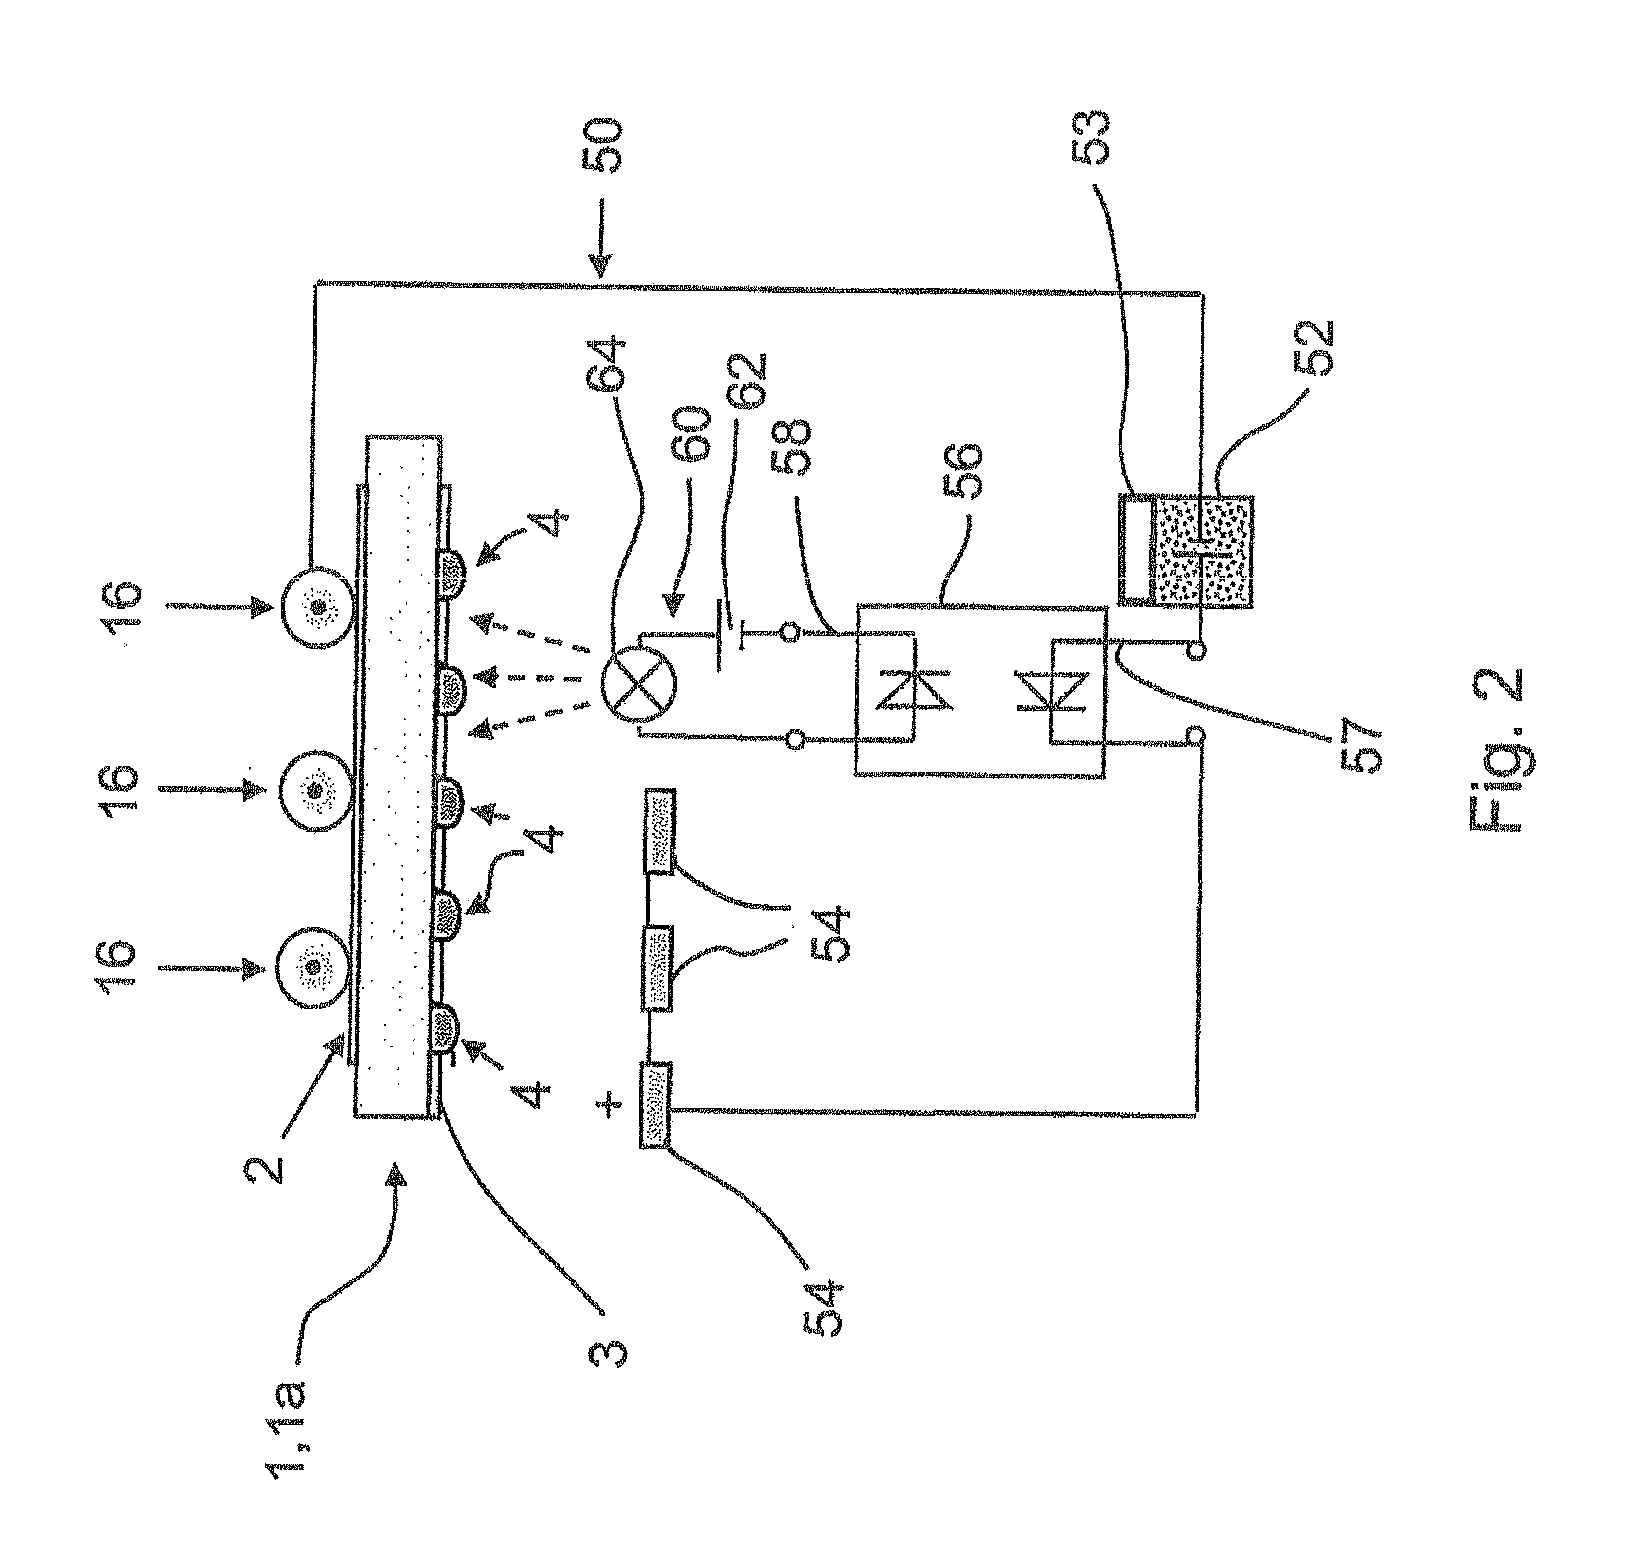 Process and apparatus for electroplating substrates